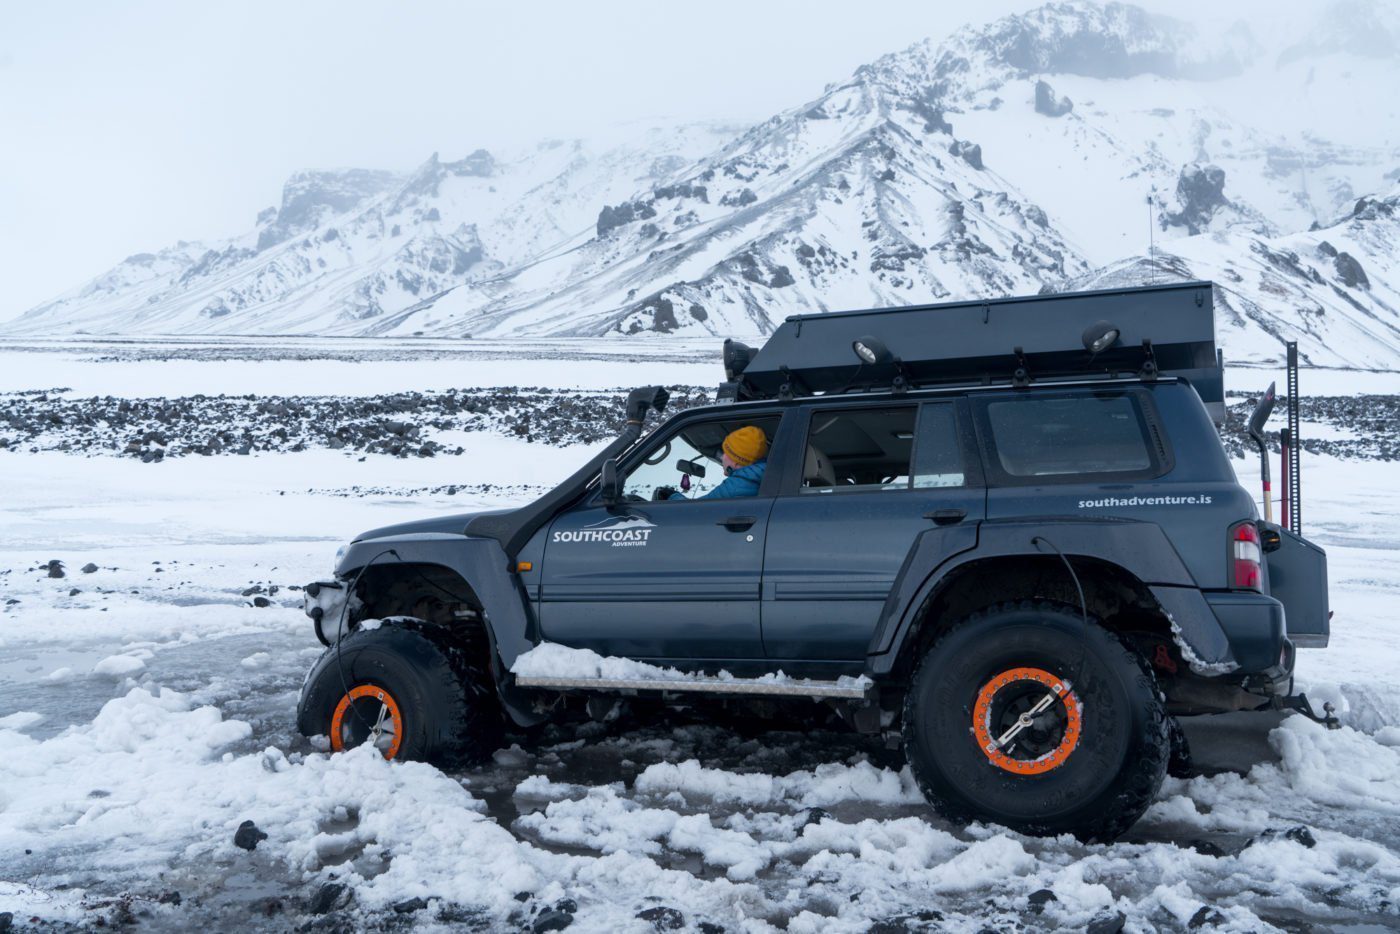 Trying to find the best path through an icy river with a super jeep